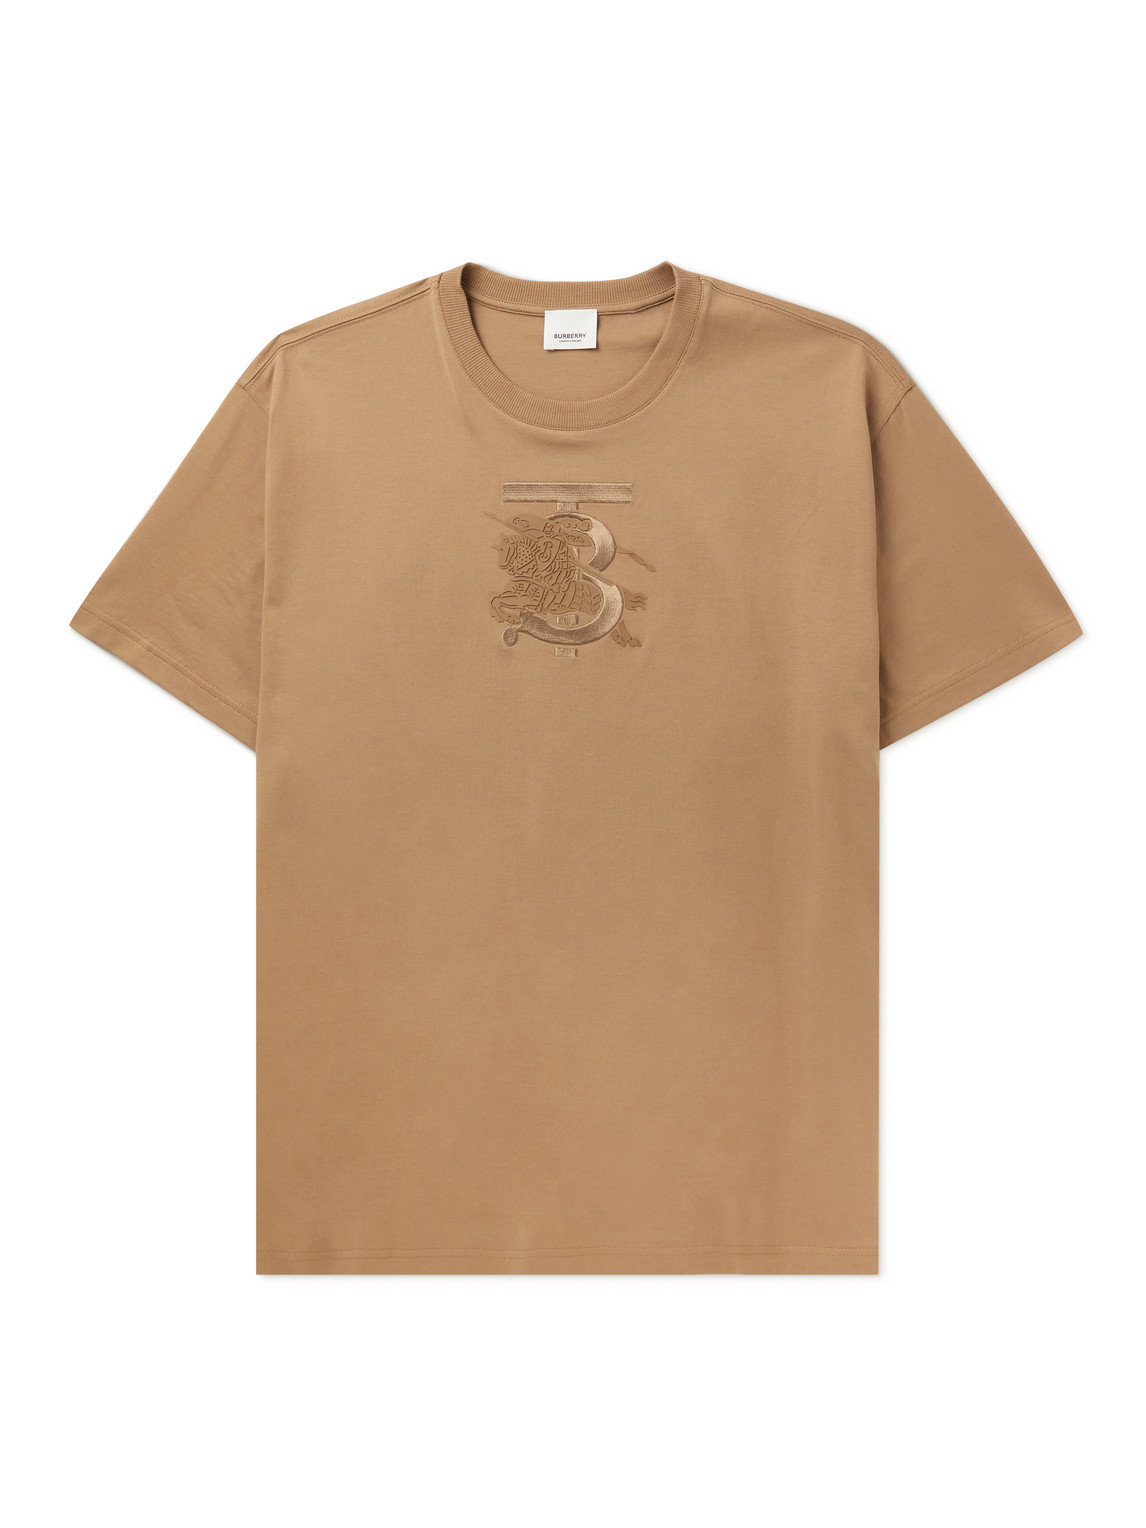 Burberry Embroidered Monogram Ekd Cotton T-shirt In Camel